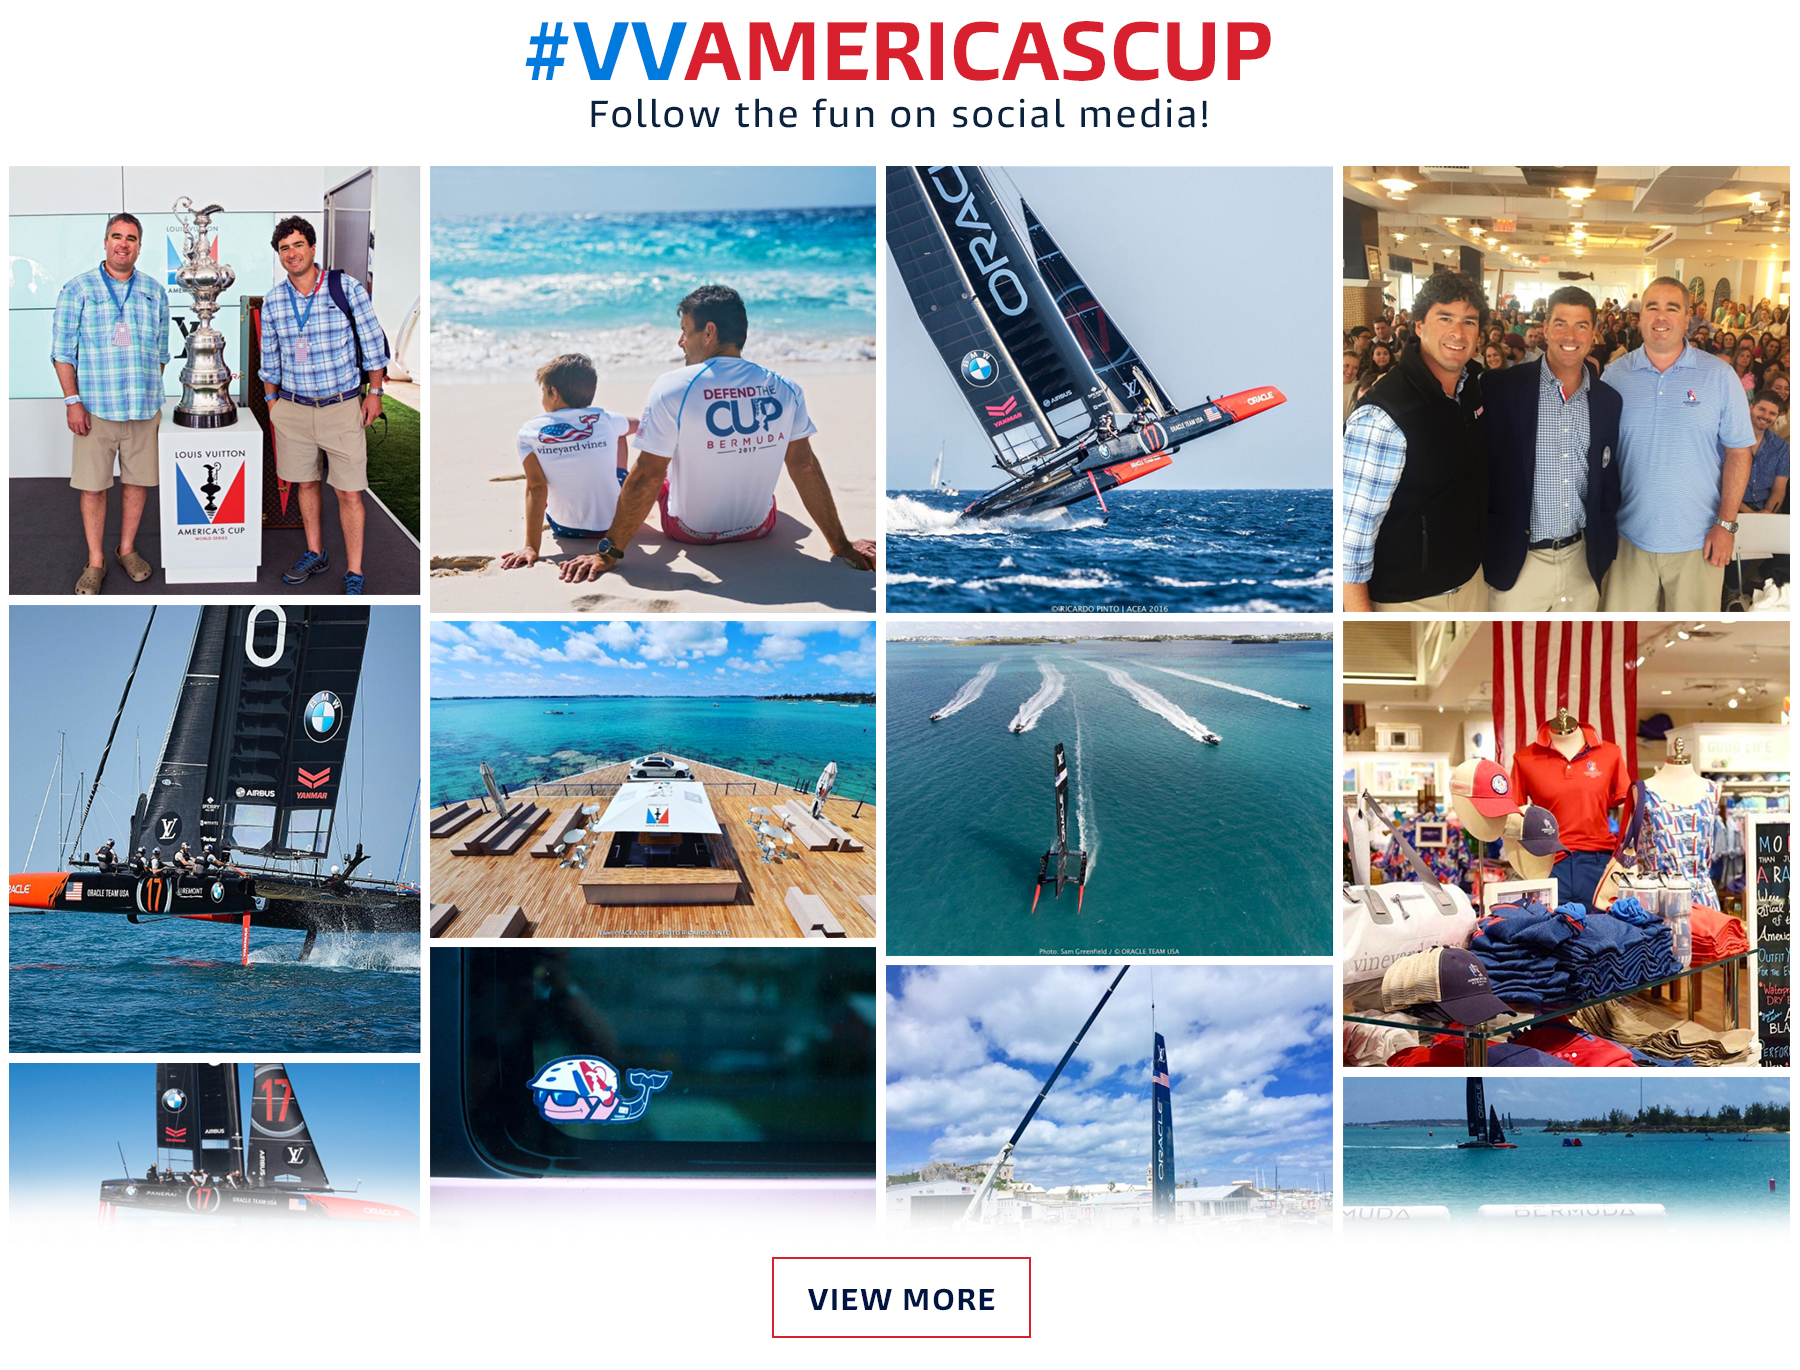 VINEYARD VINES CONTINUES AMERICAS CUP PARTNERSHIP WITH NEW COLLECTION